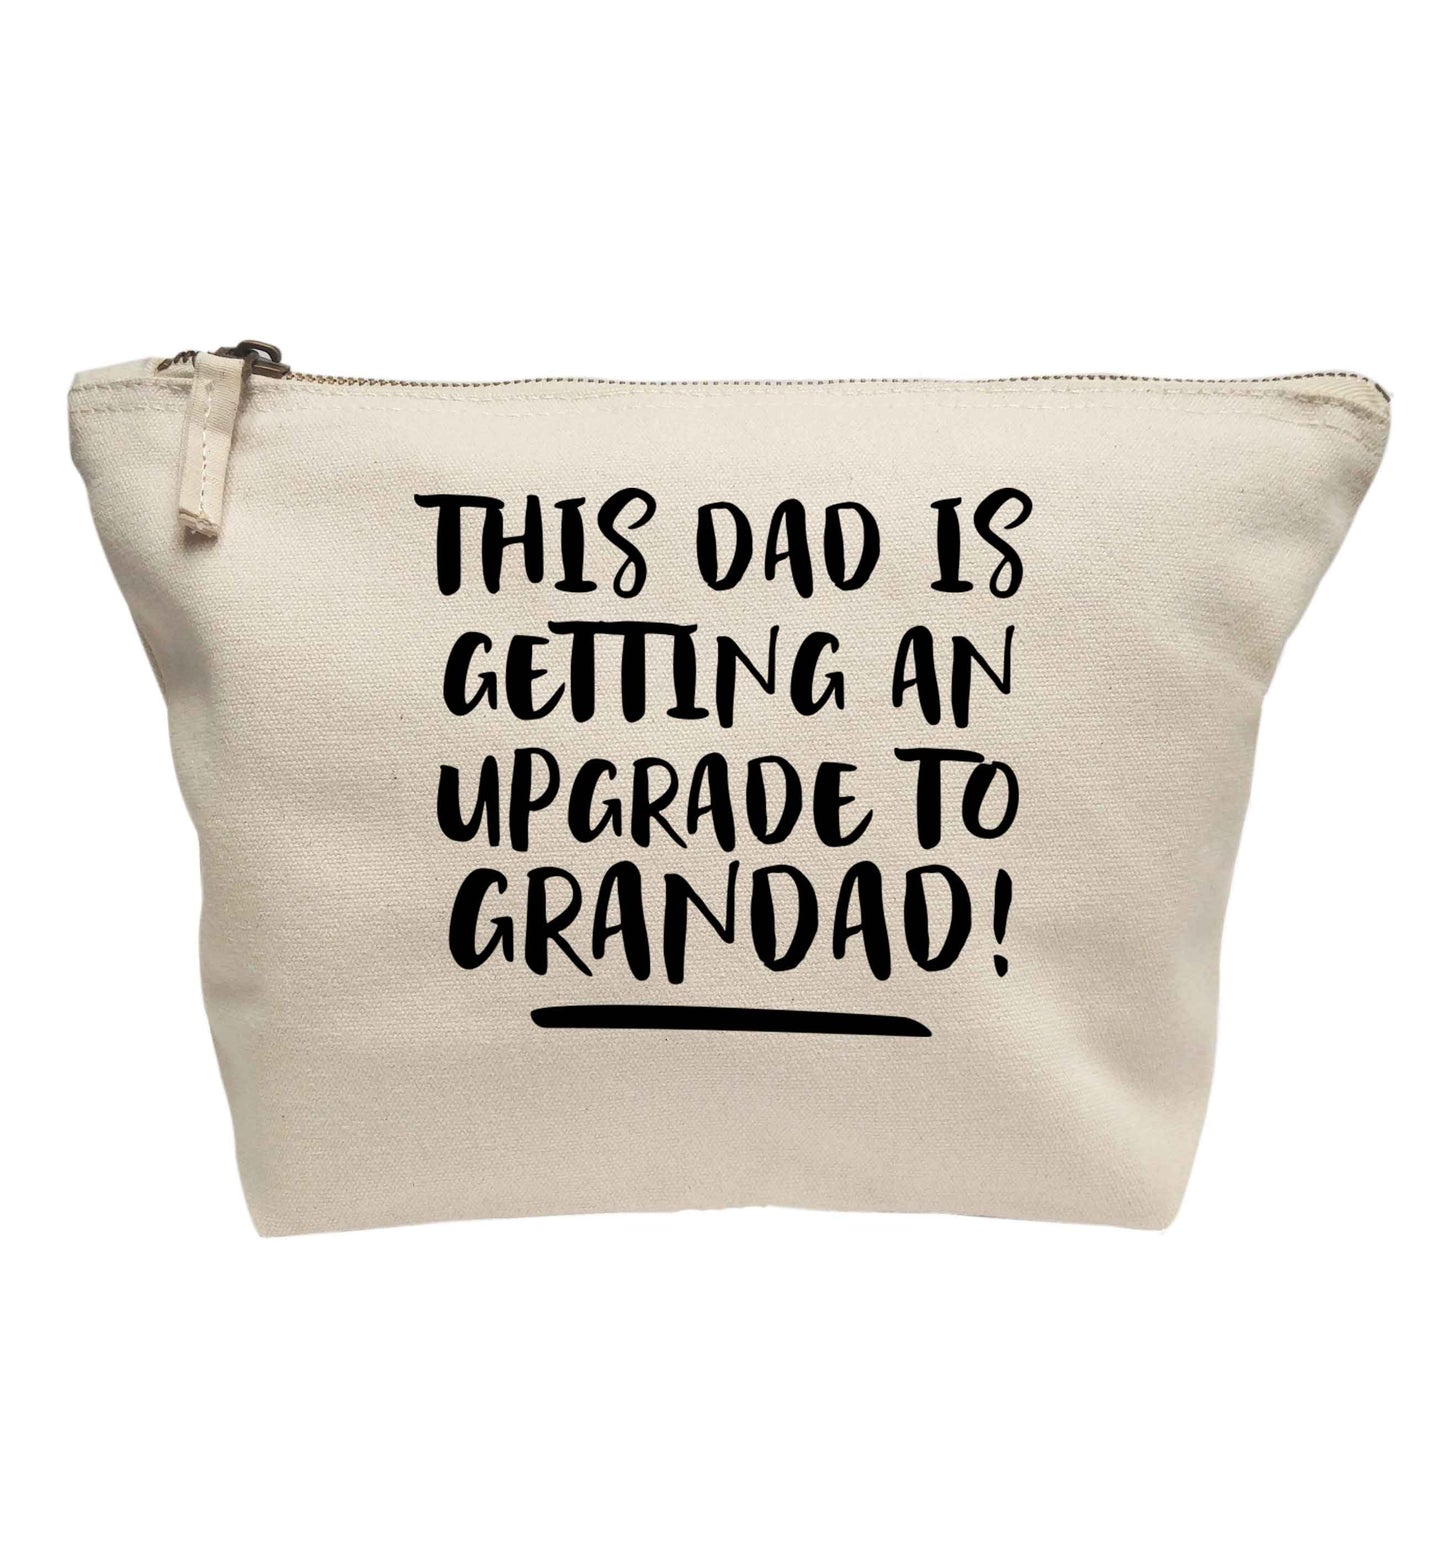 This dad is getting an upgrade to grandad! | makeup / wash bag